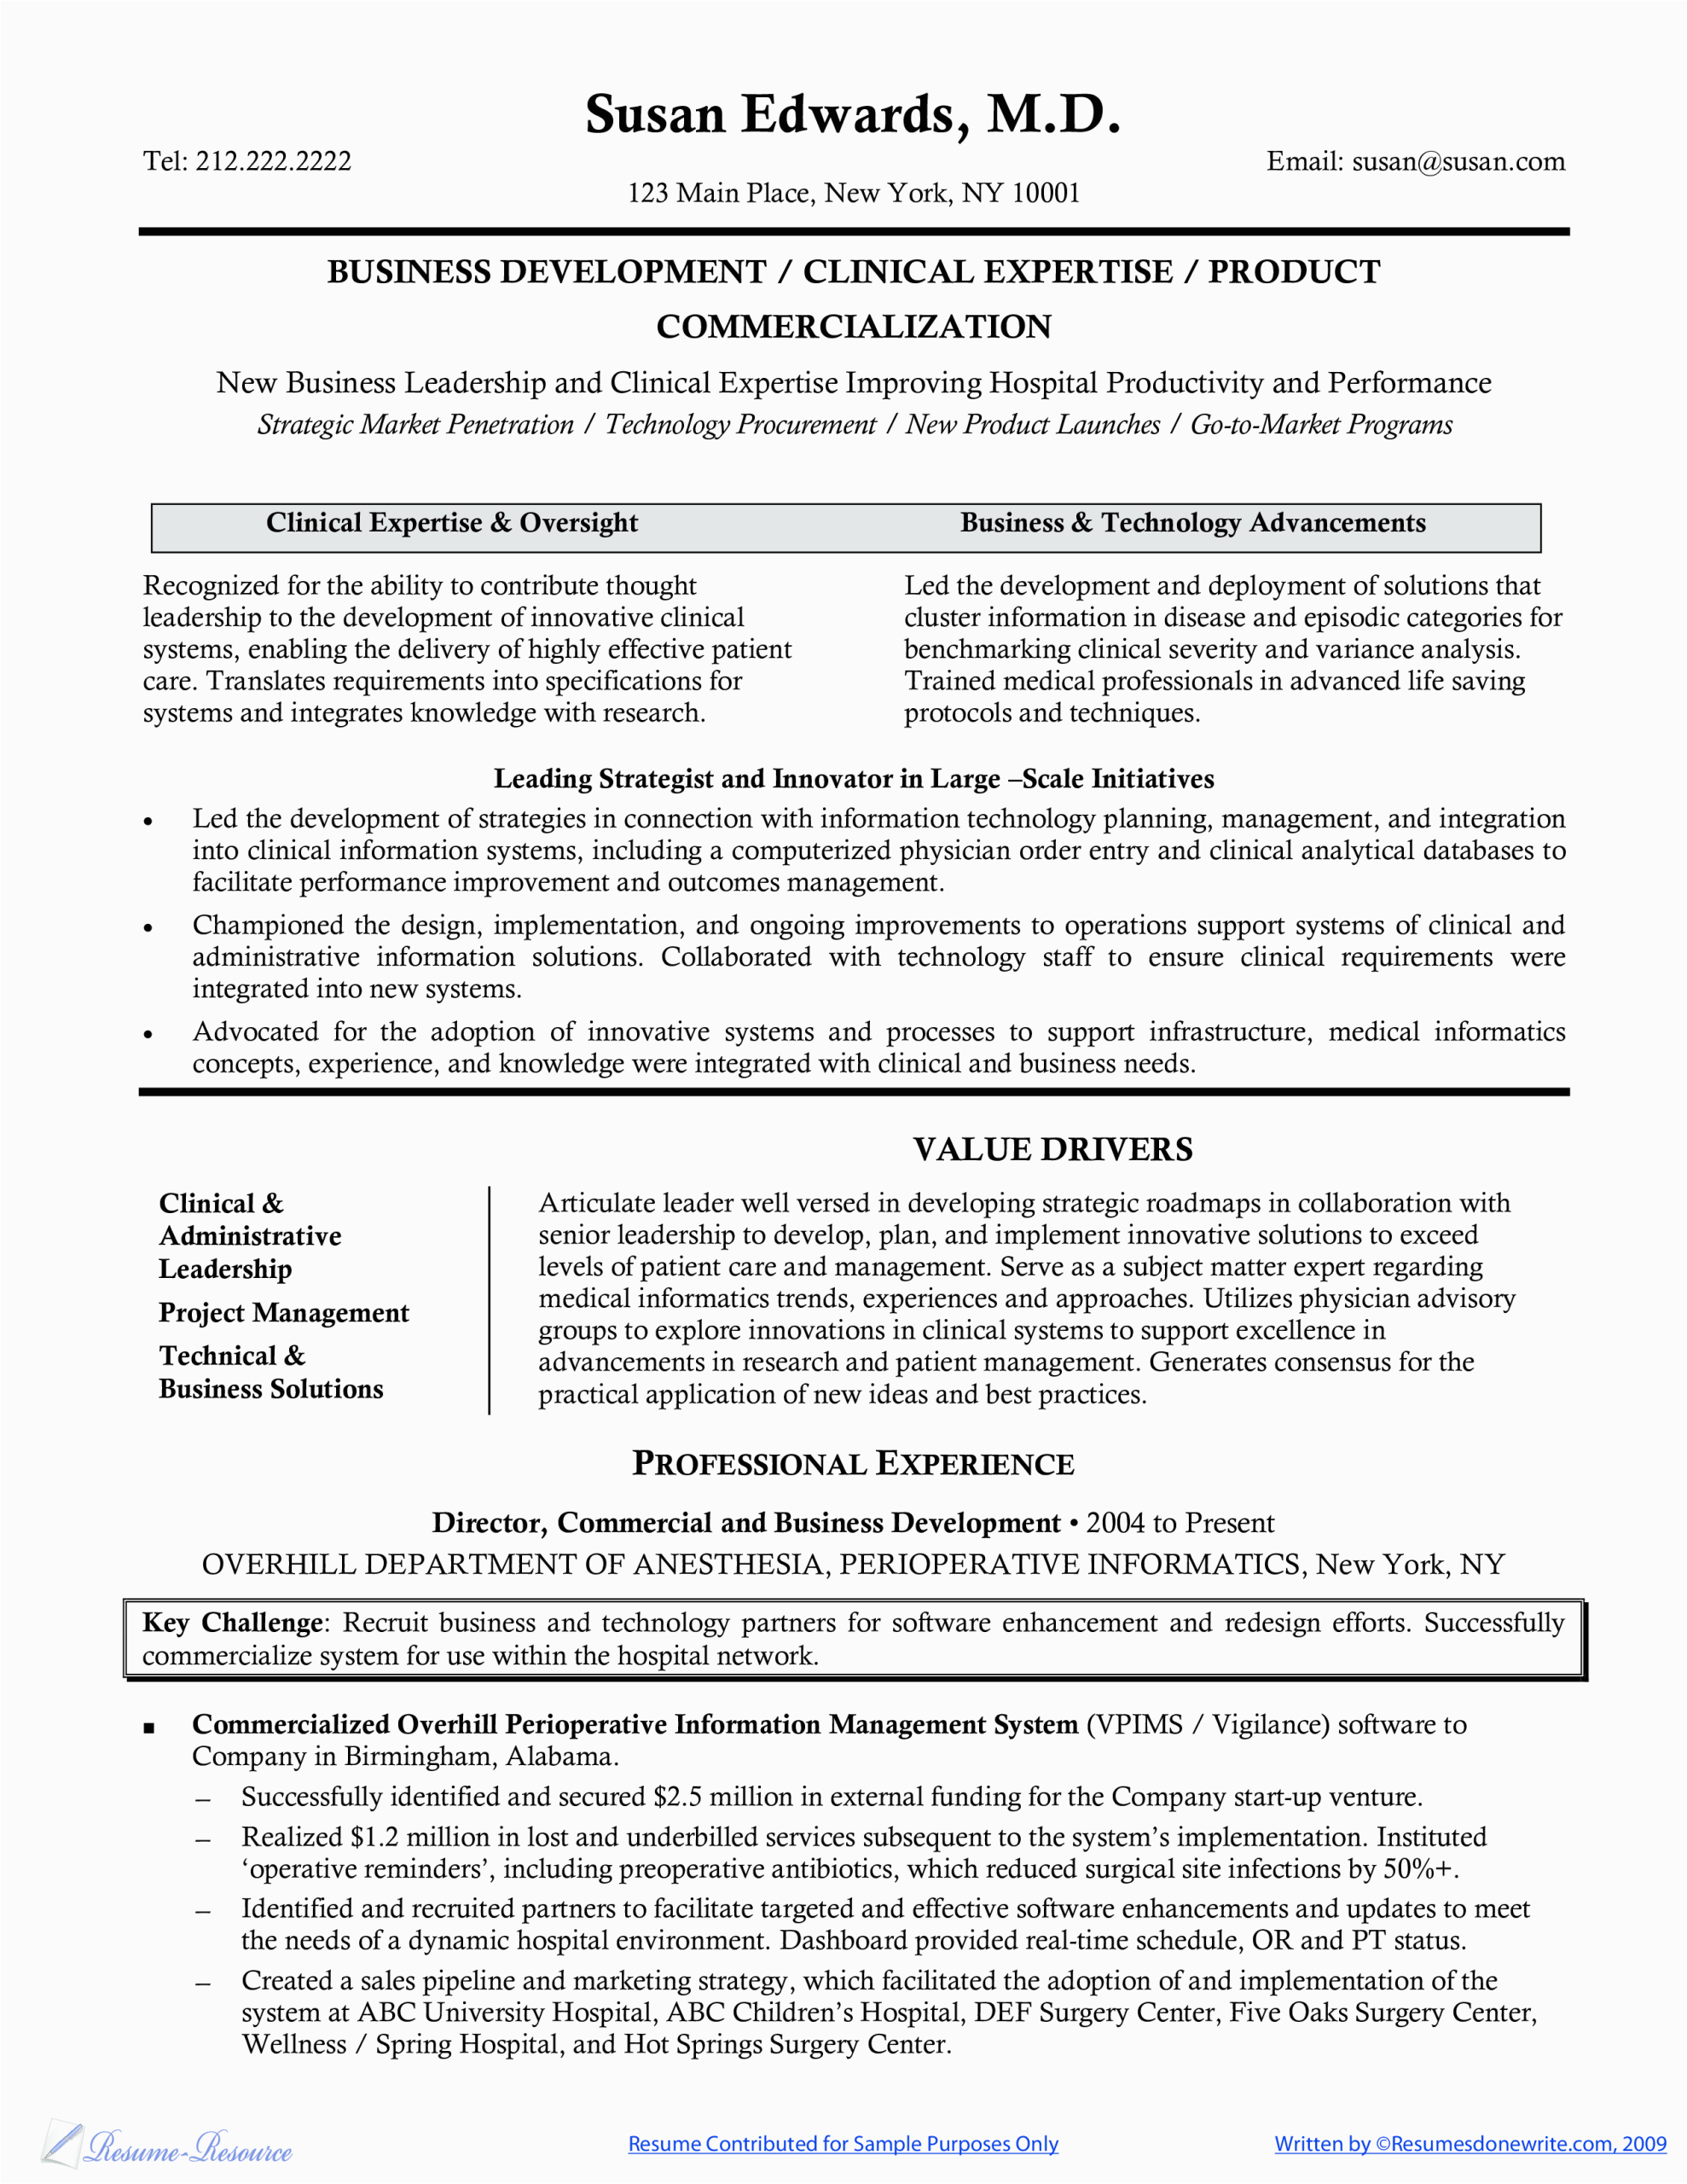 Sample Resume for Biomaker Development and assays Clinical Research Resume Sample